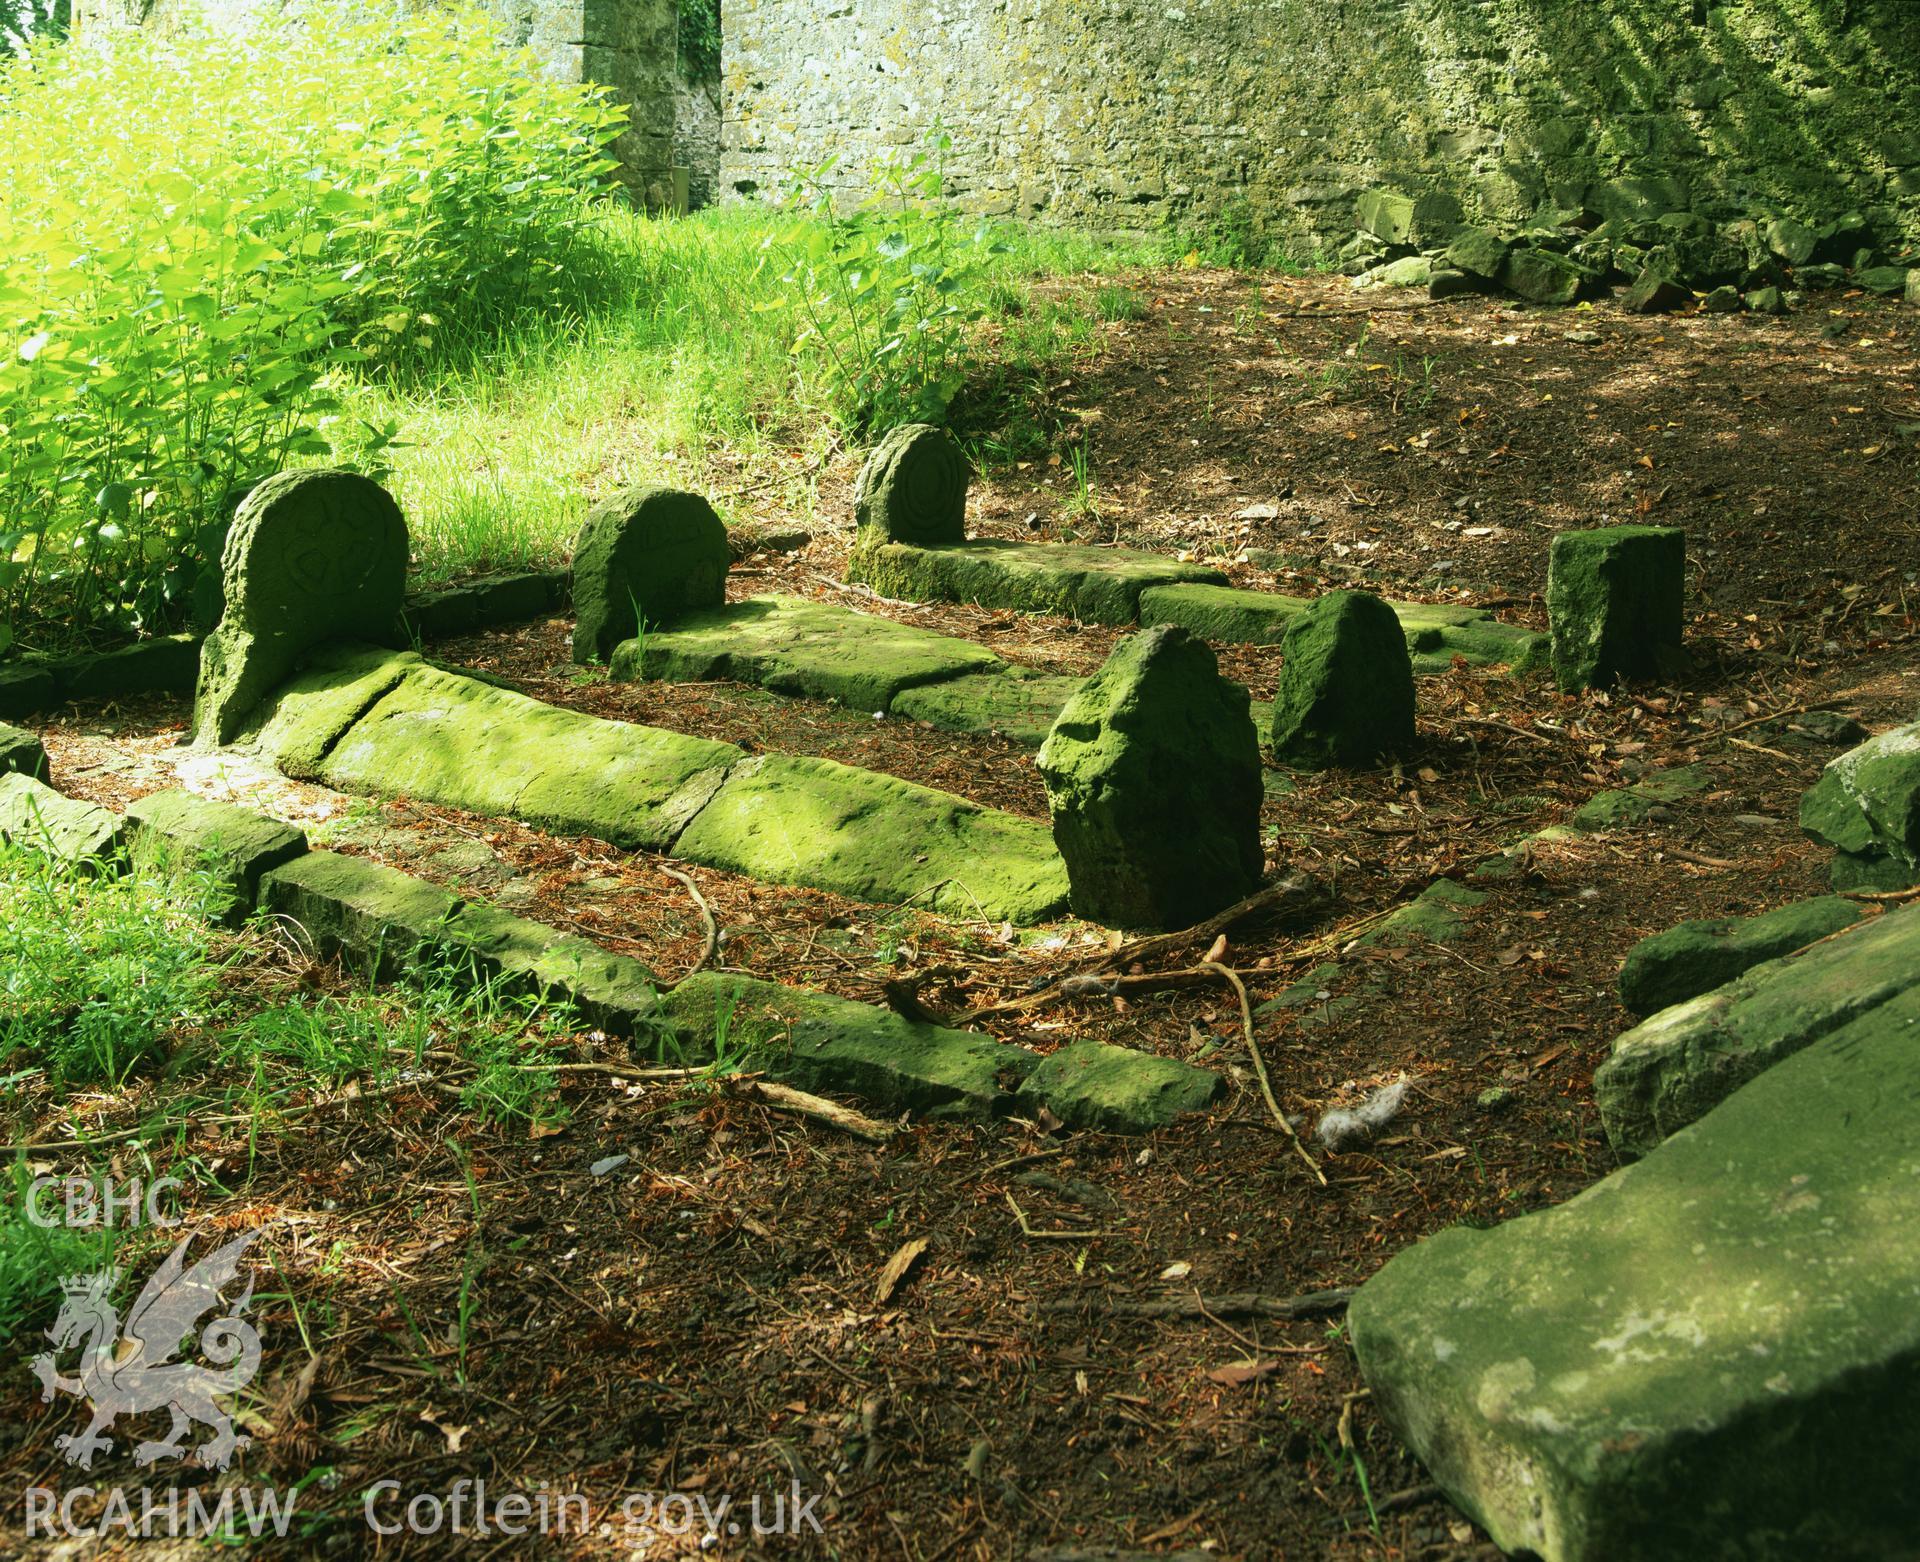 Colour transparency showing view of the Pilgrim's Grave in St Michaels Churchyard, Llanfihangel Abercowin, produced by Iain Wright, June 2004